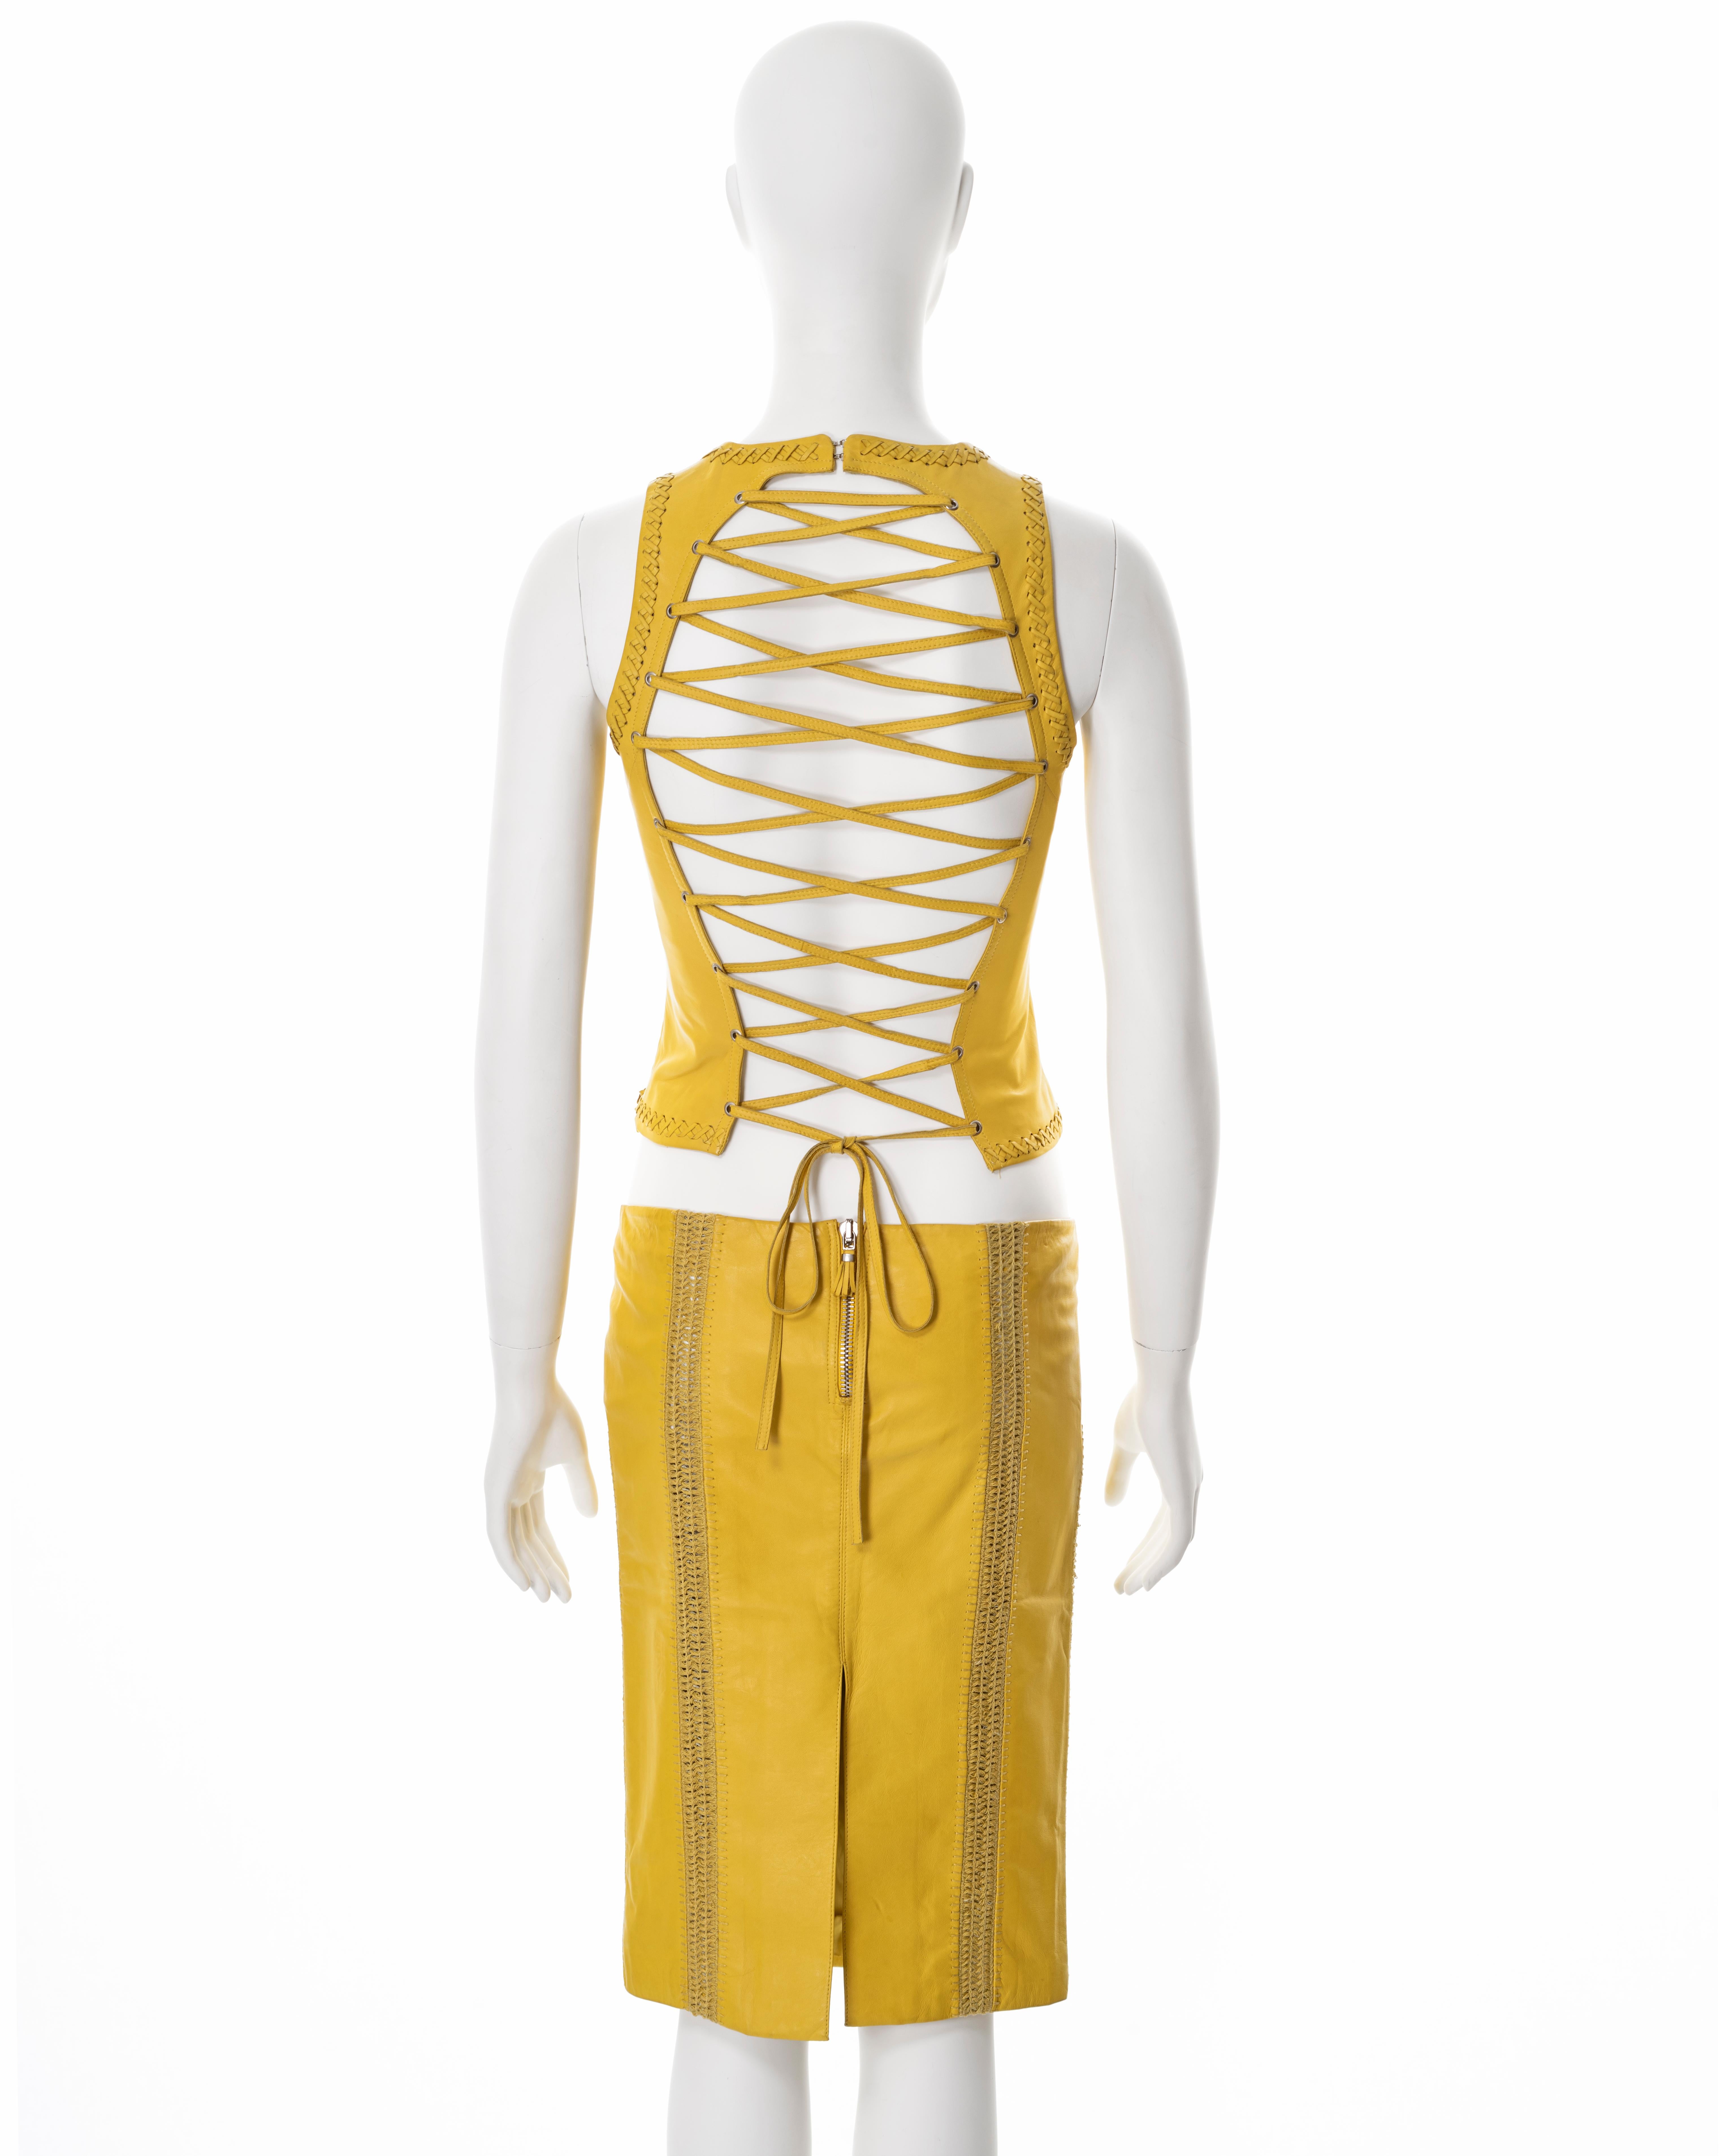 Gianni Versace yellow lambskin leather top and skirt, ss 2003 For Sale 3